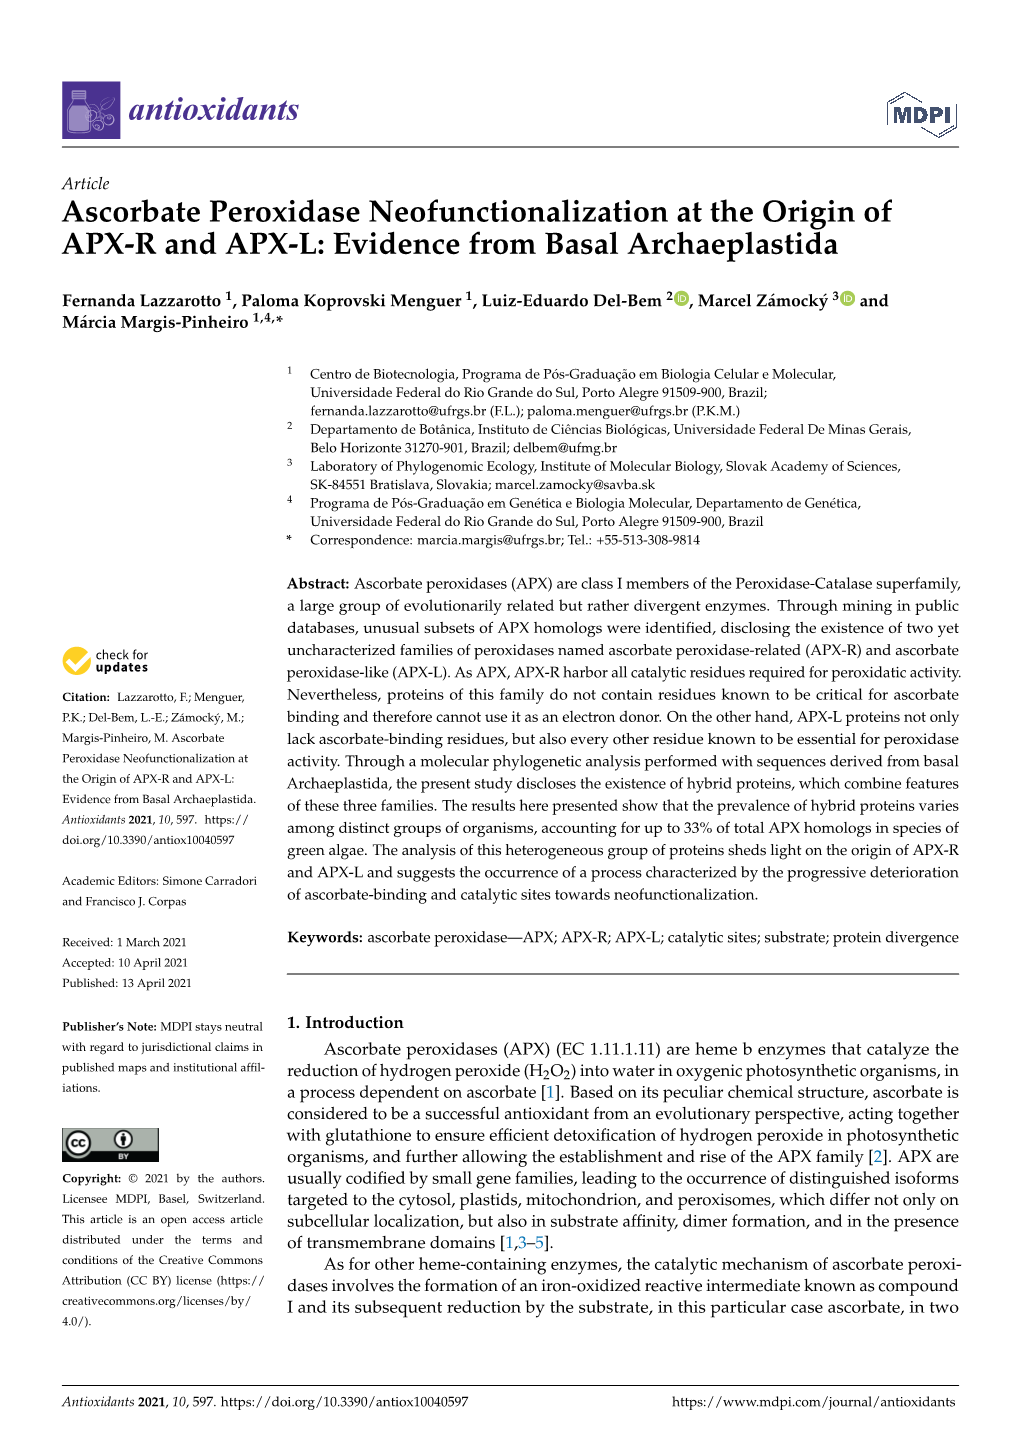 Ascorbate Peroxidase Neofunctionalization at the Origin of APX-R and APX-L: Evidence from Basal Archaeplastida